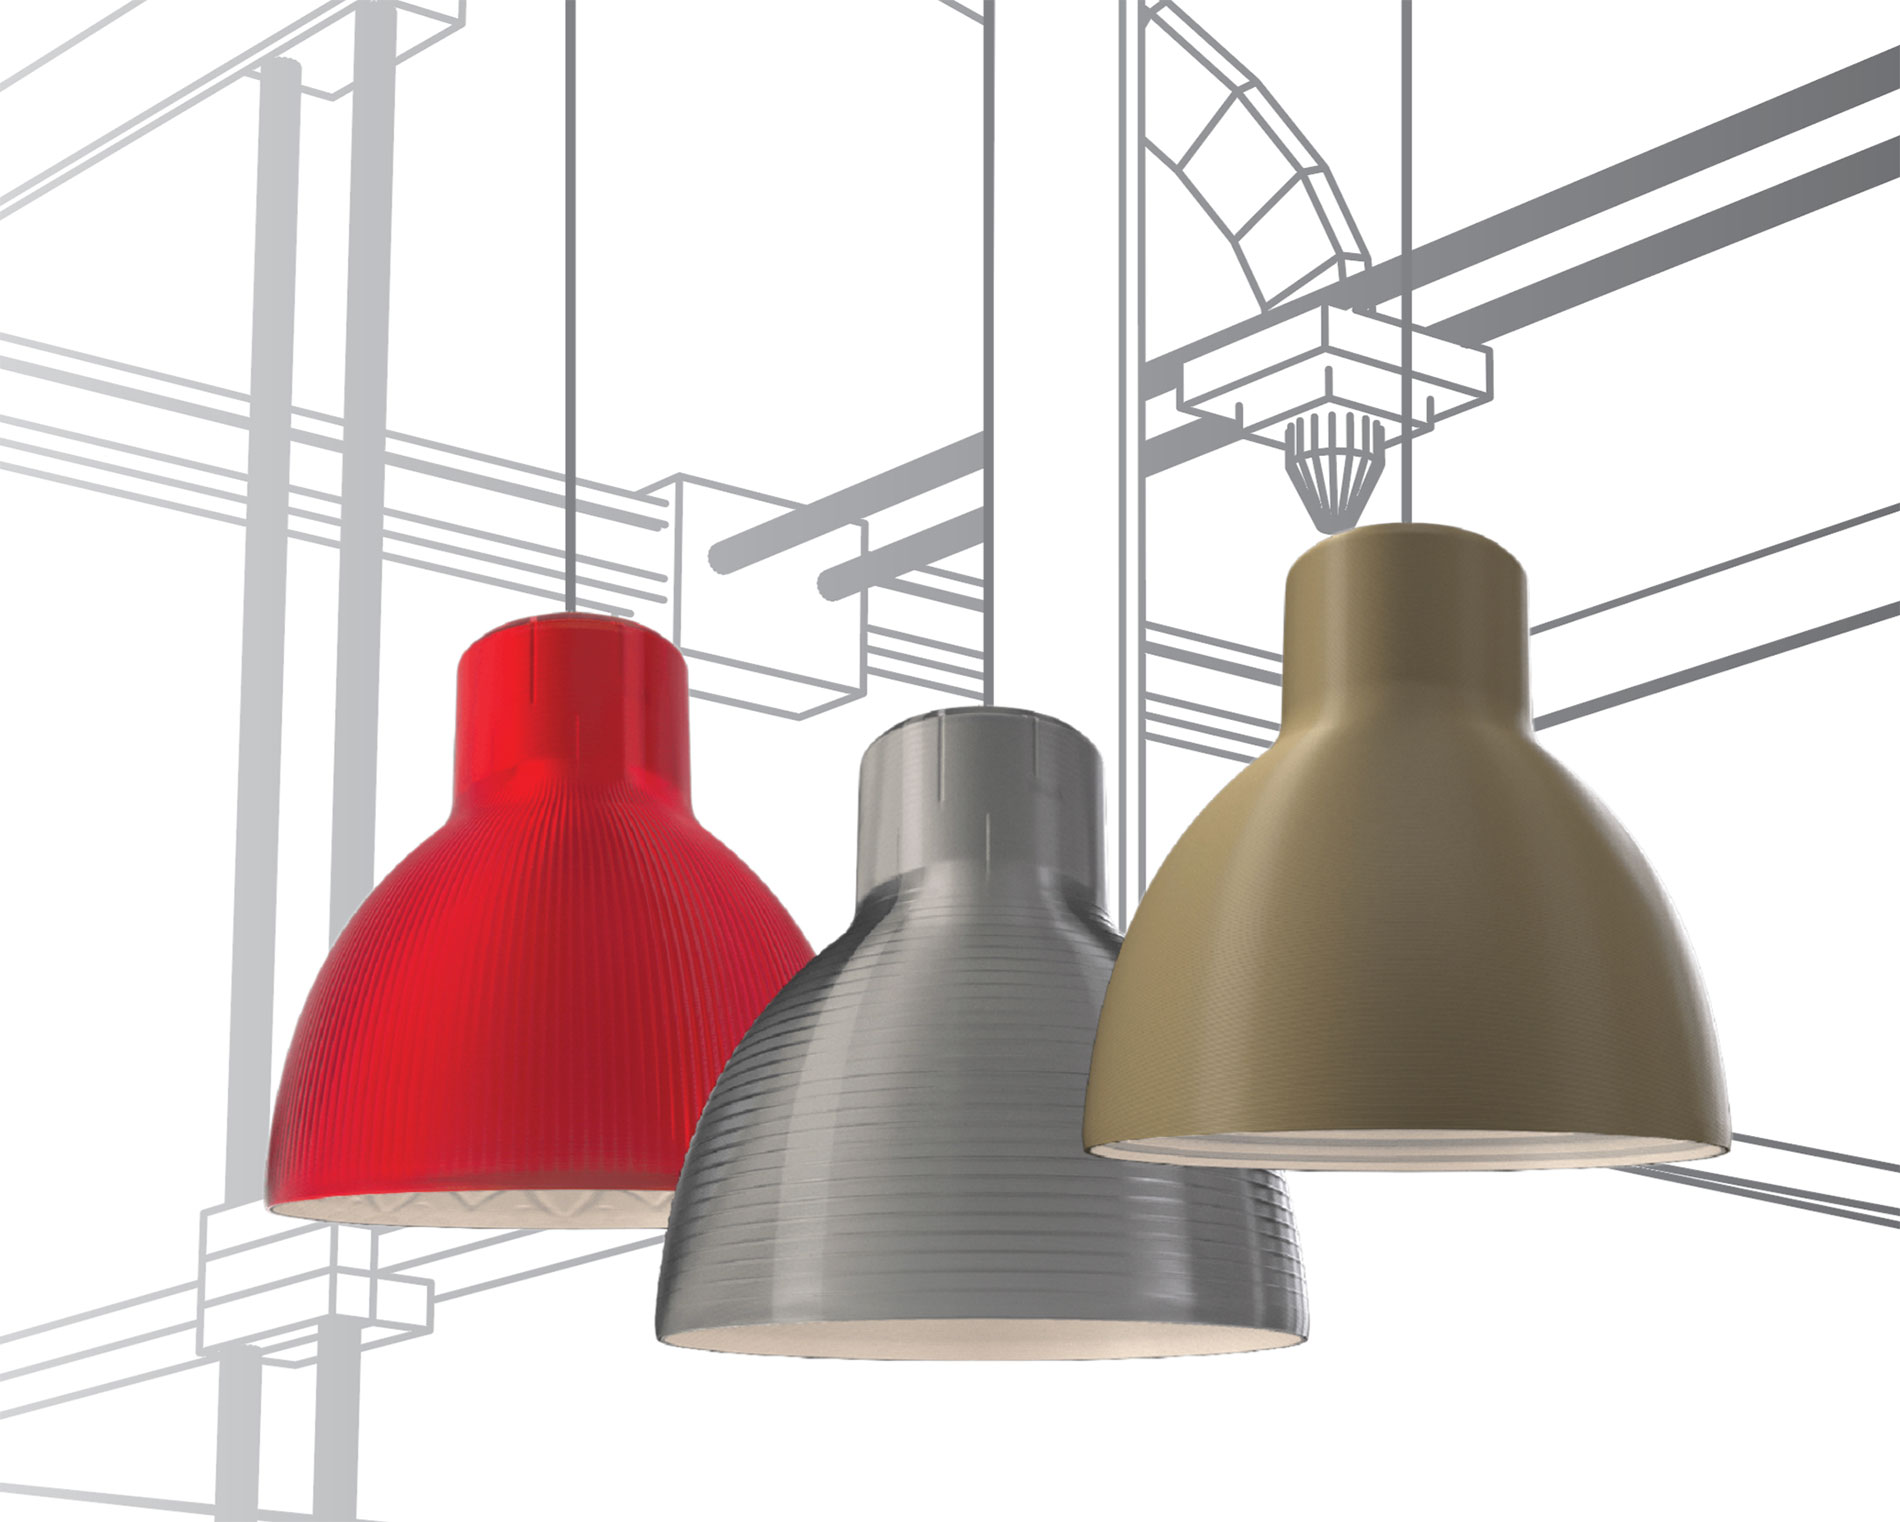 How to Use a 3D Printing Farm to Manufacture Lamps